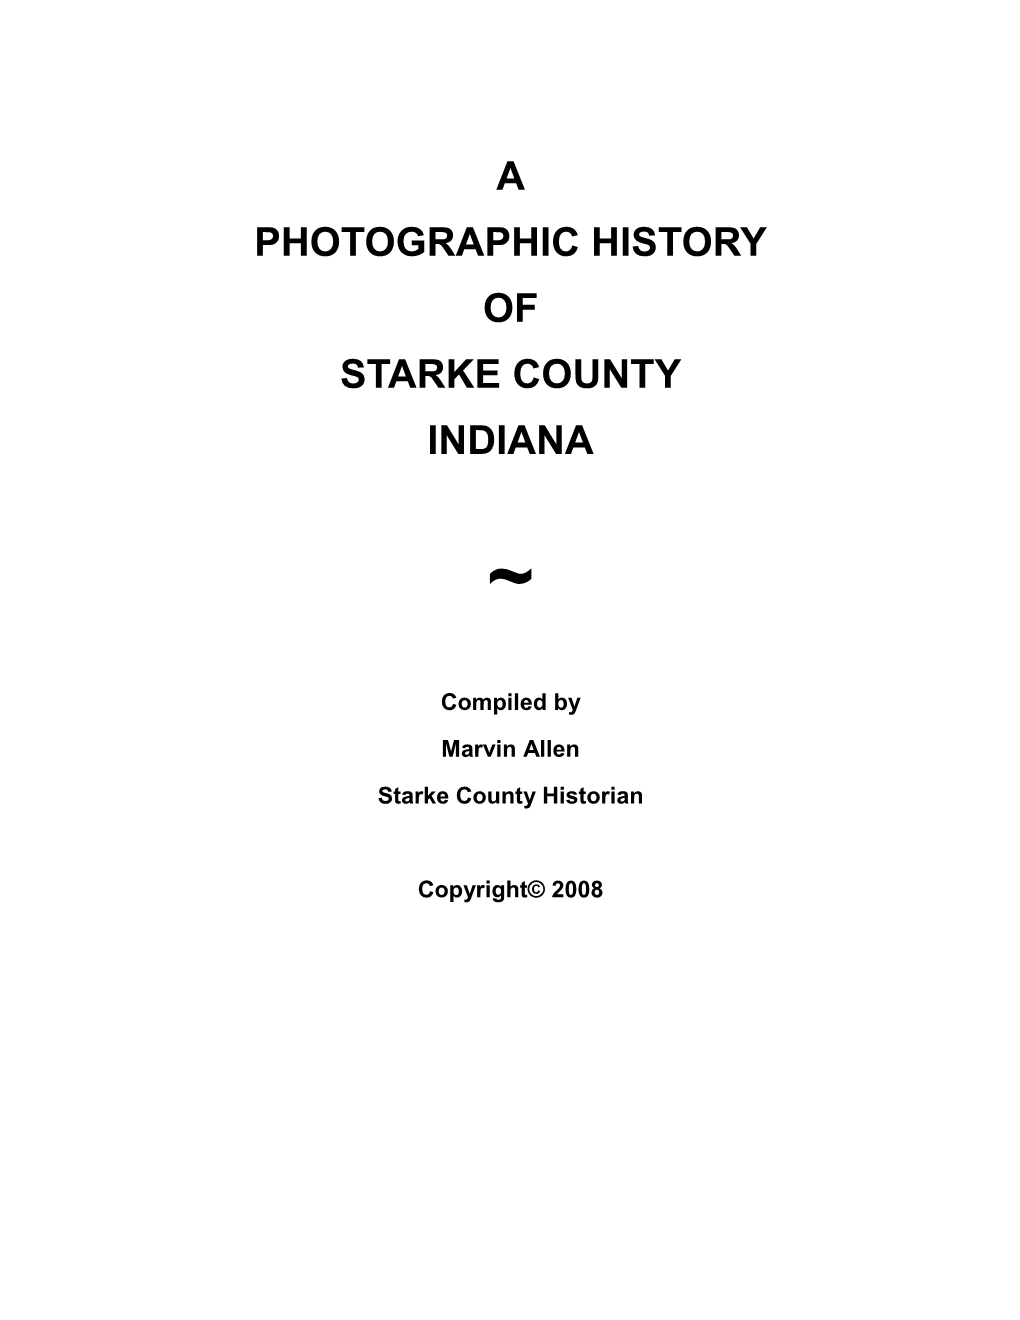 Starke County Historical Society Has Applied for a Historical Marker to Commemorate This Historically Important School